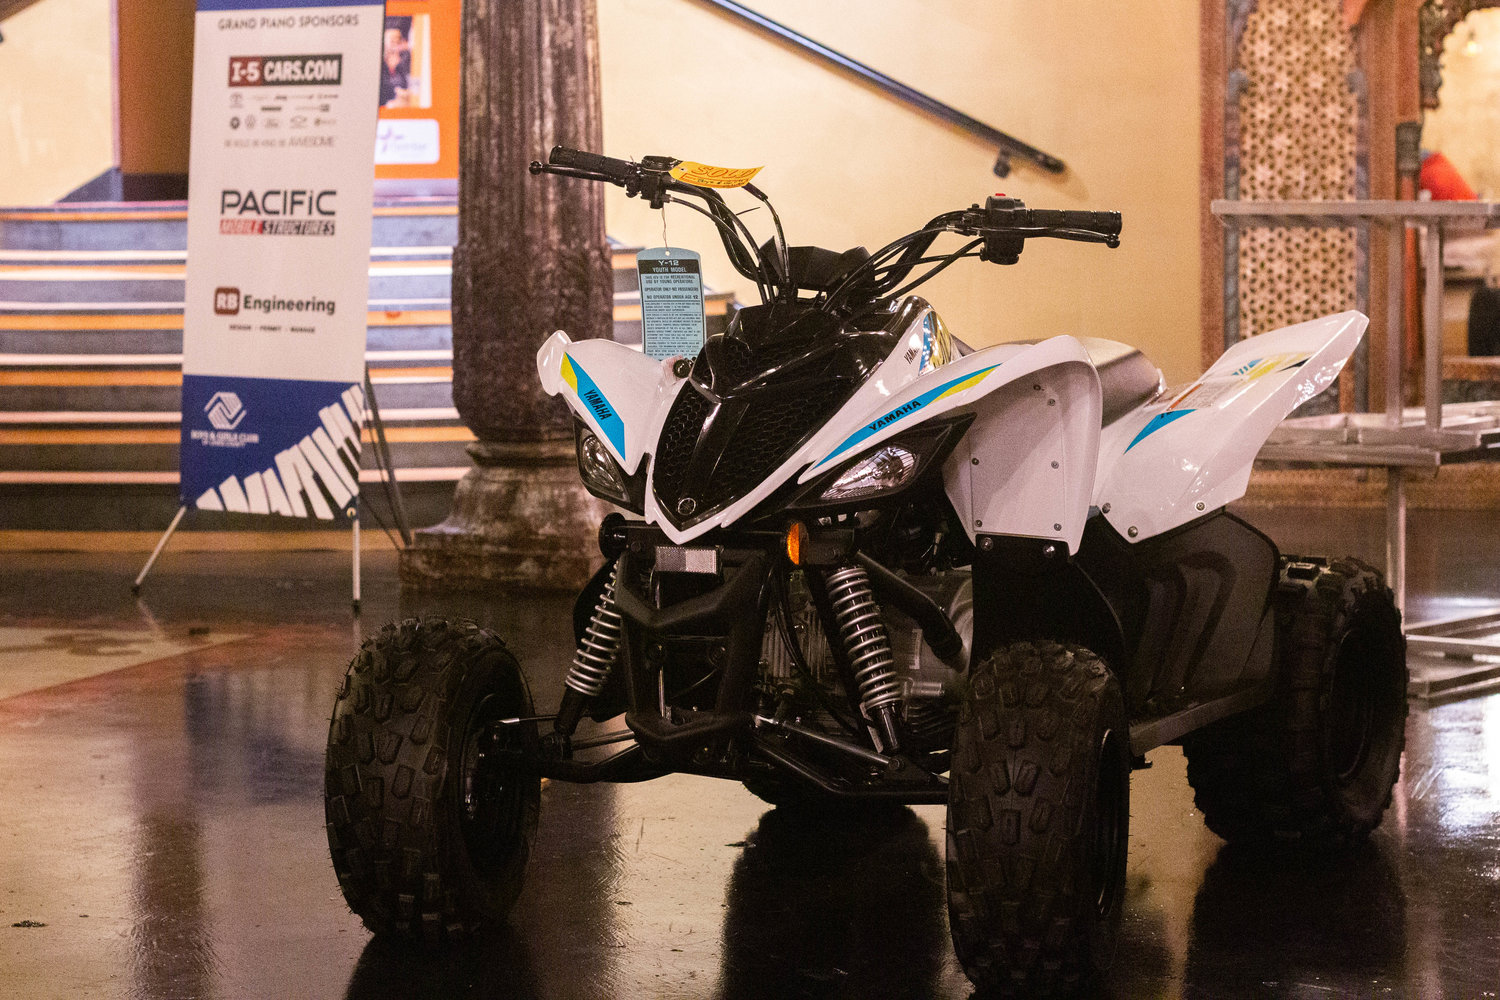 A Yamaha quad was among raffle items on display during a Harmonies for Hope event raising money for the Boys and Girls Club of Lewis County on Saturday at City Farm Chehalis.